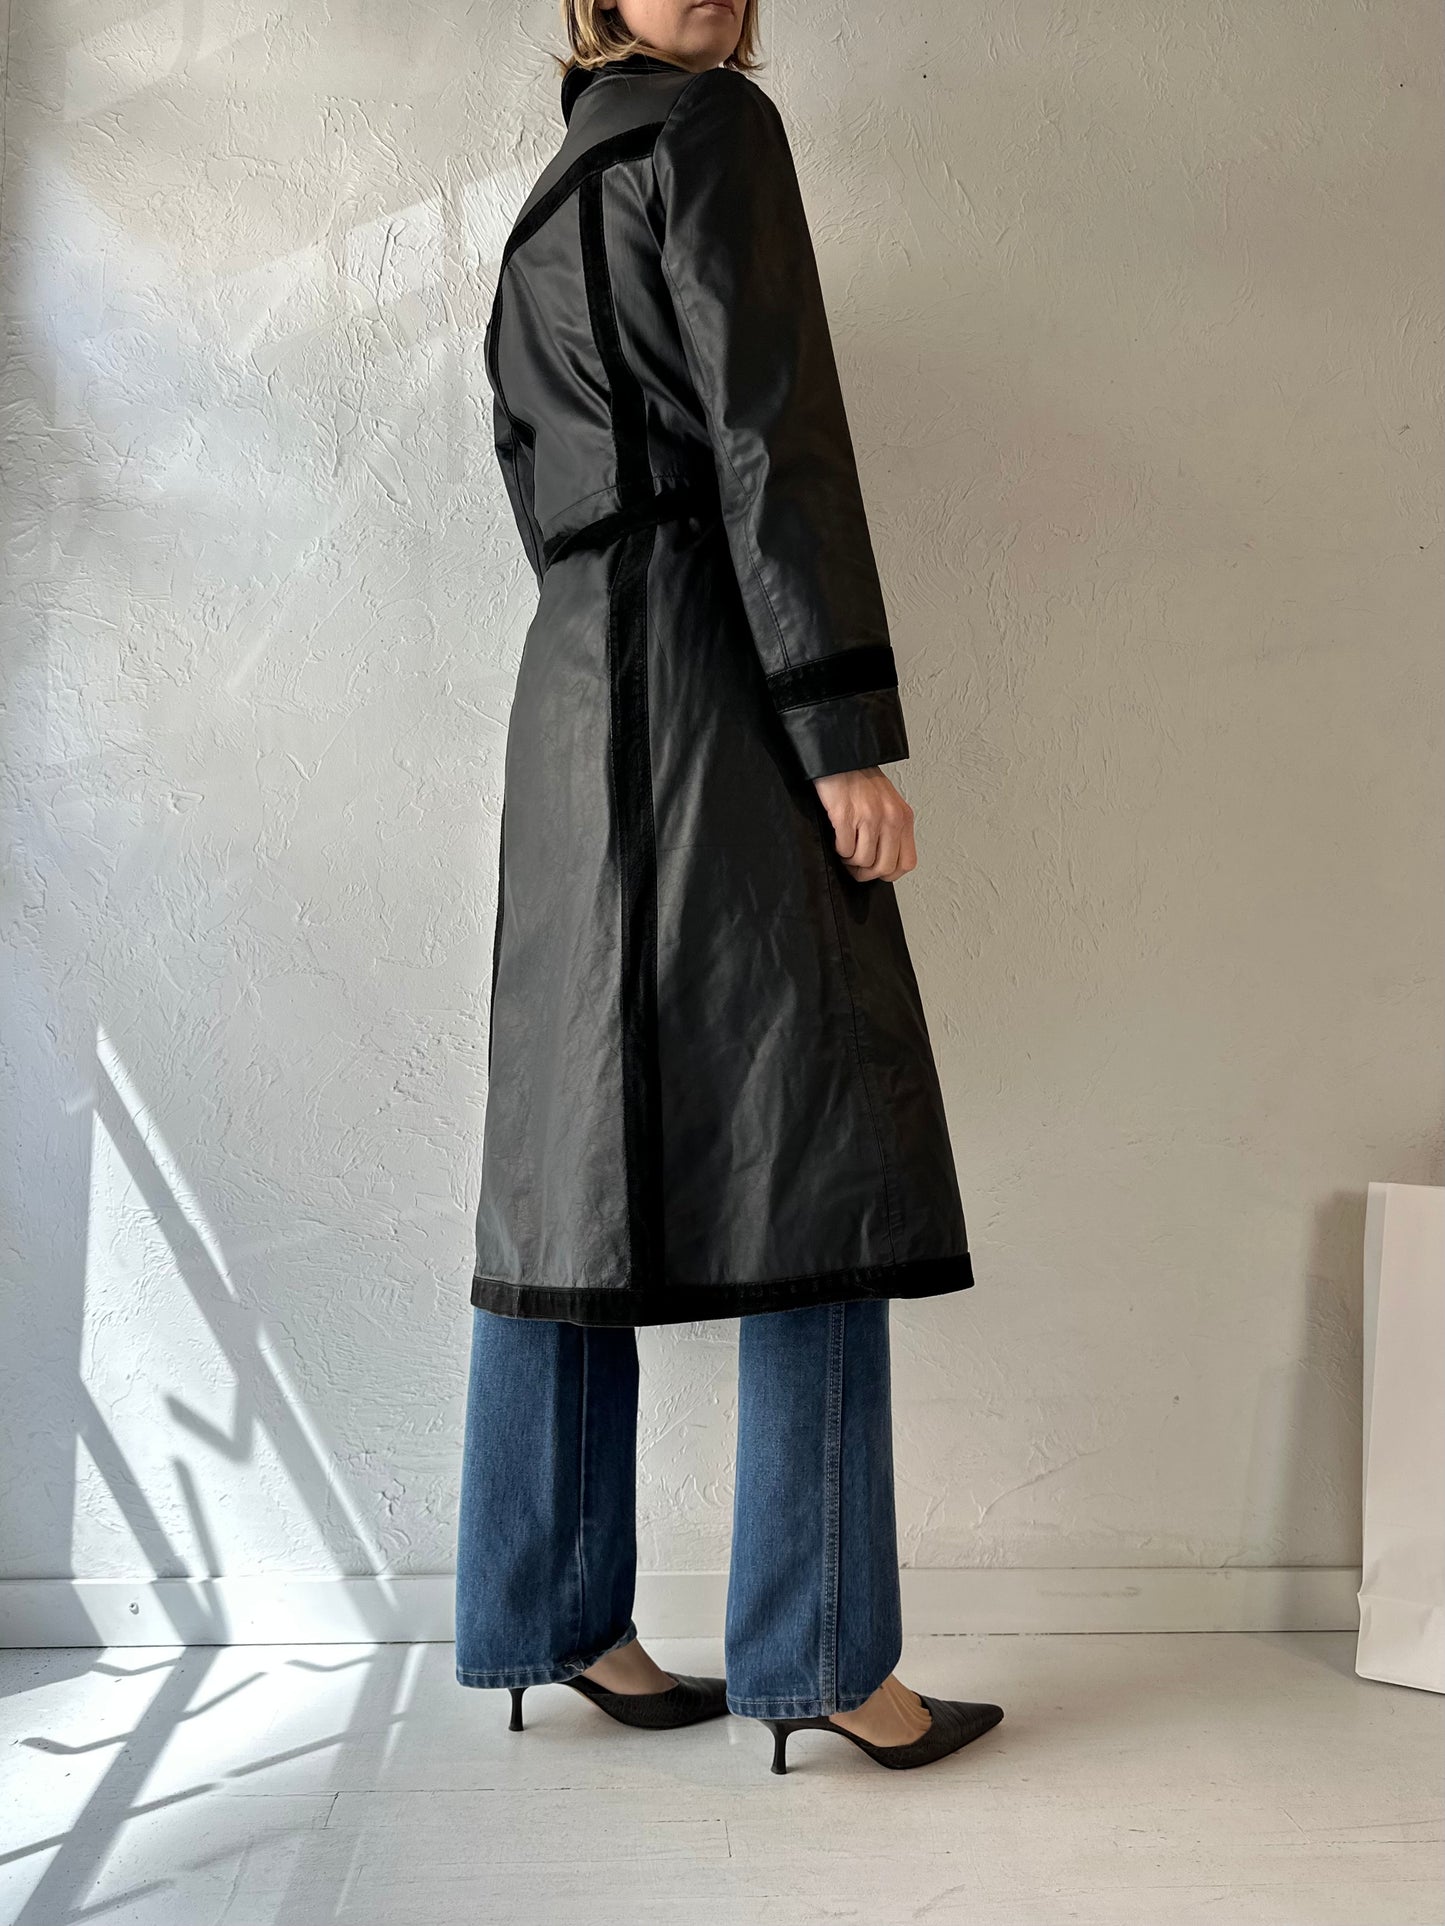 Vintage 'Sears' Black Leather Trench Coat / Small